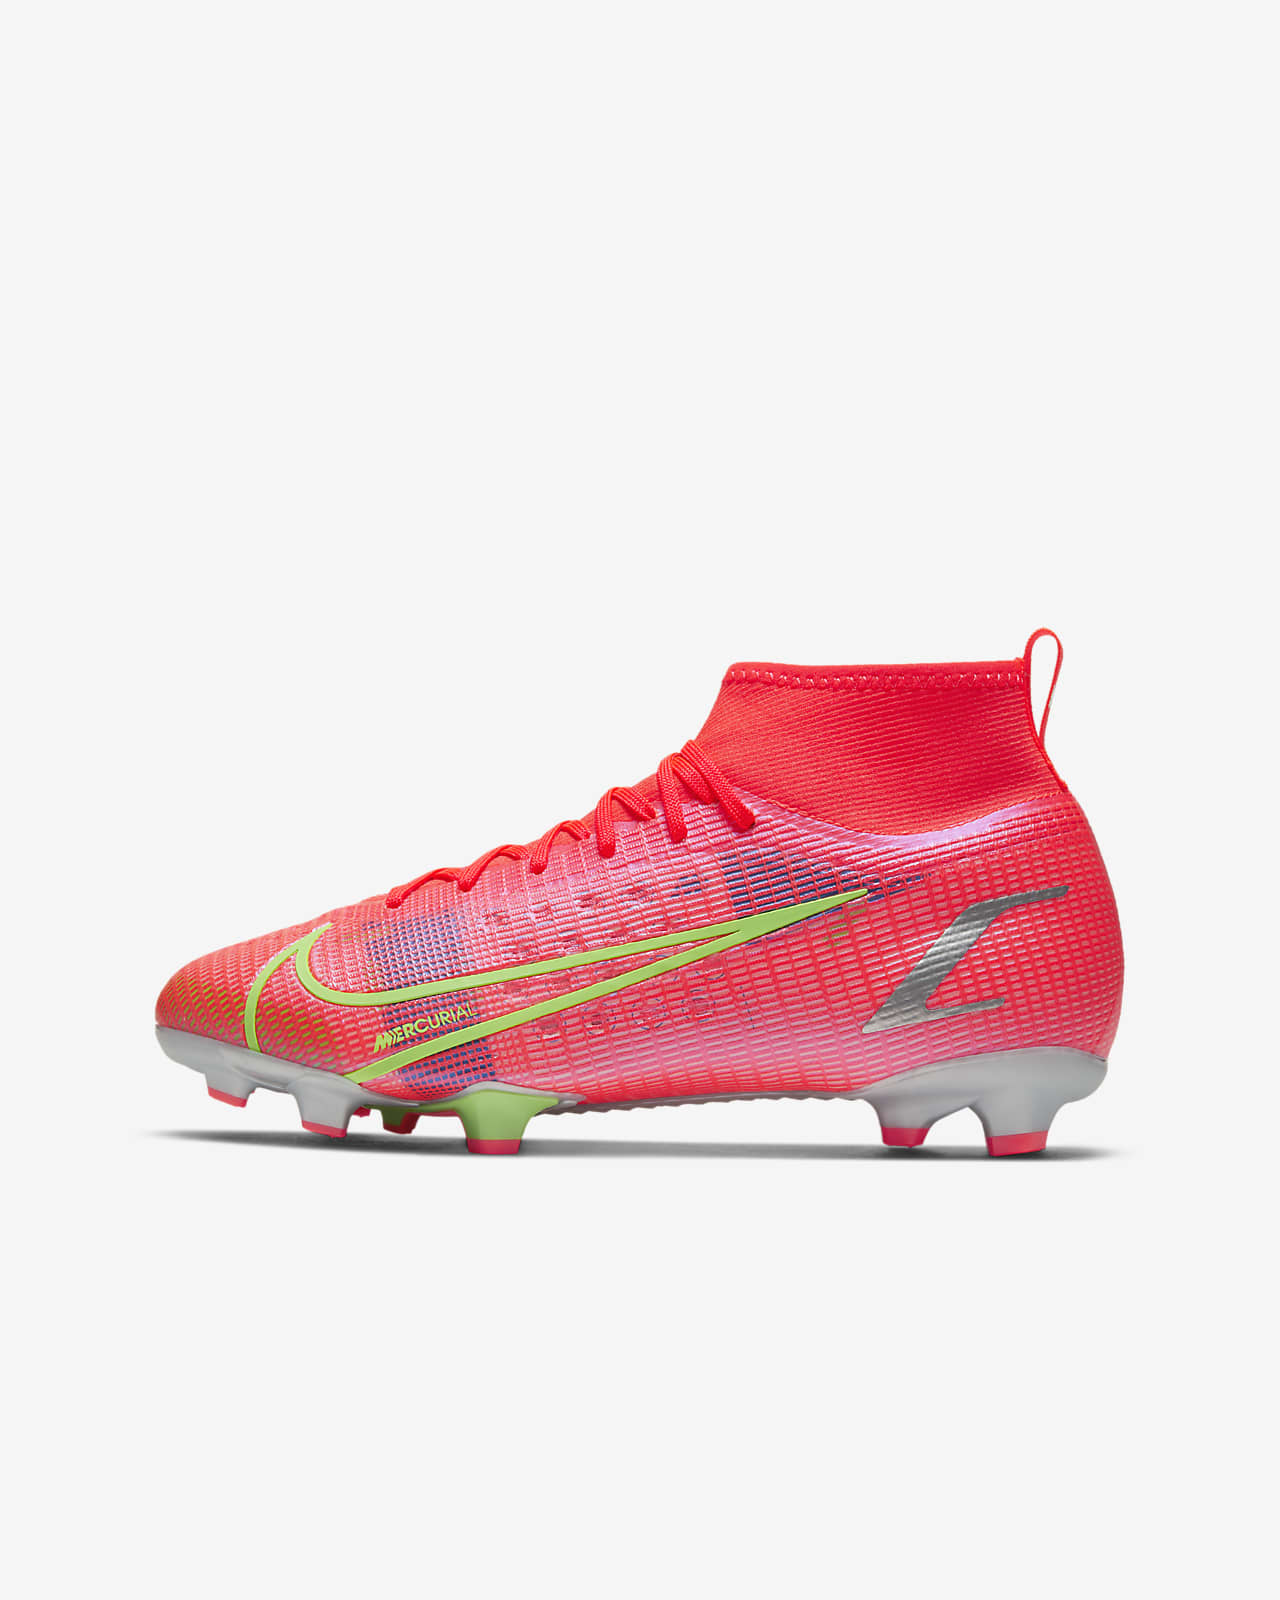 nike magista youth soccer cleats